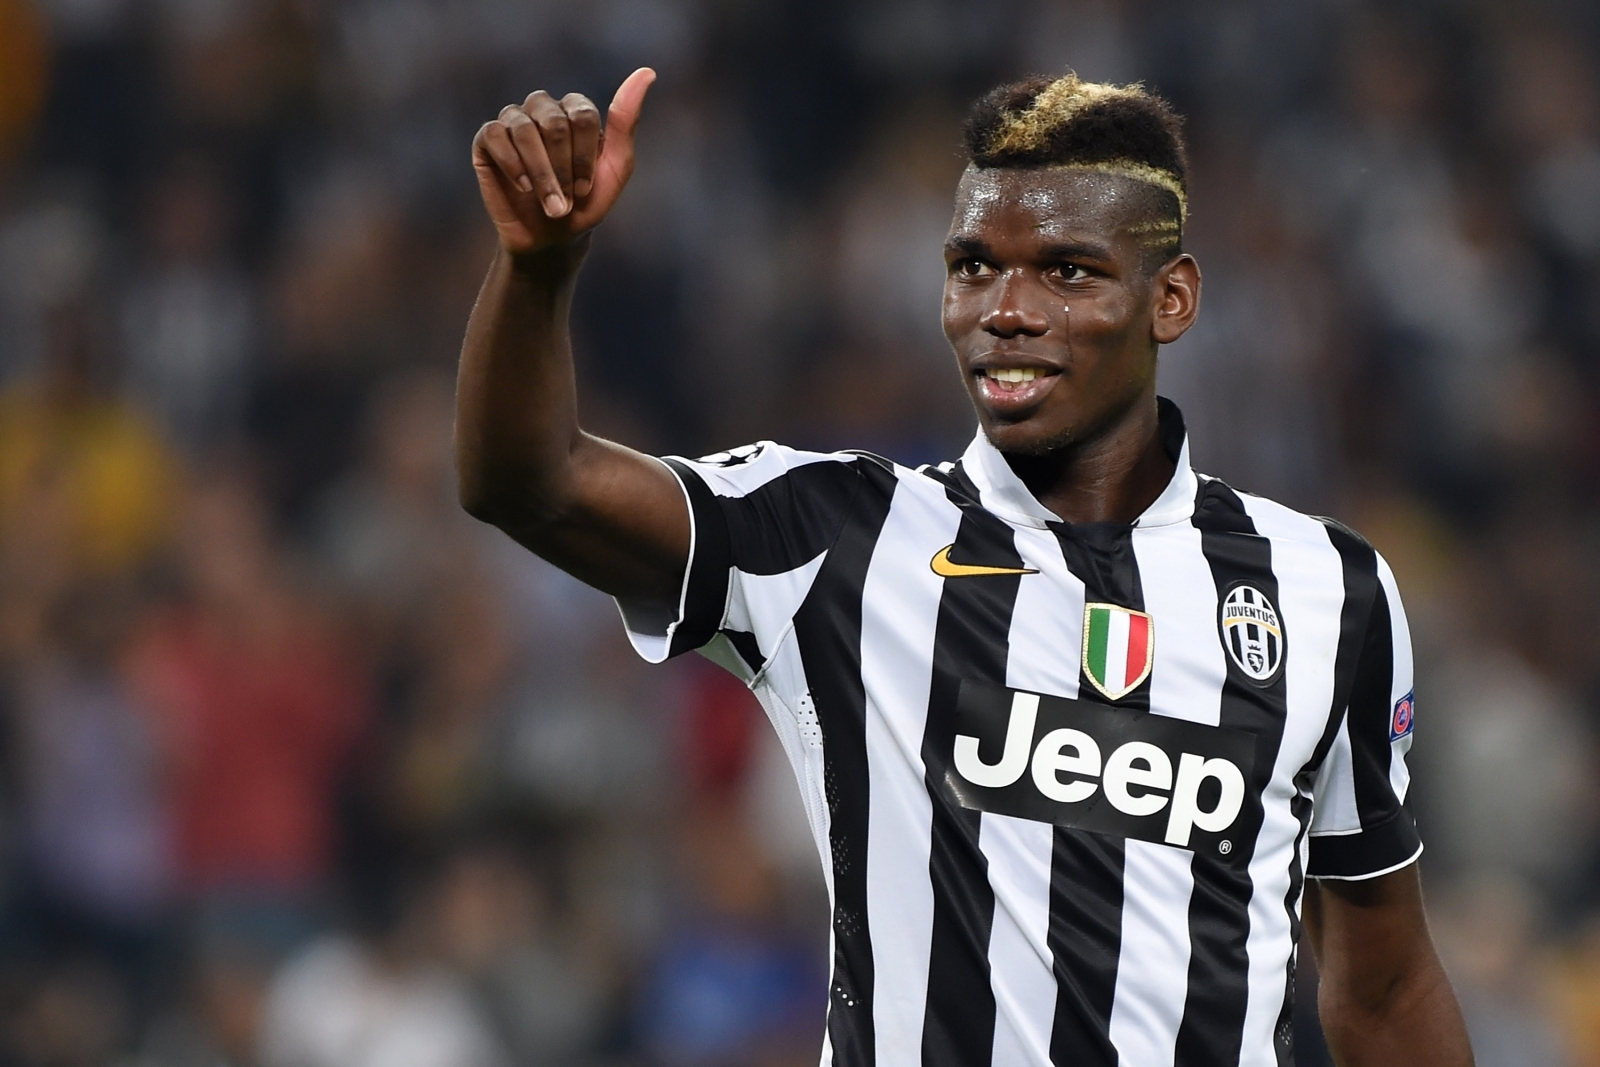 Could Paul Pogba be set to return to Manchester?